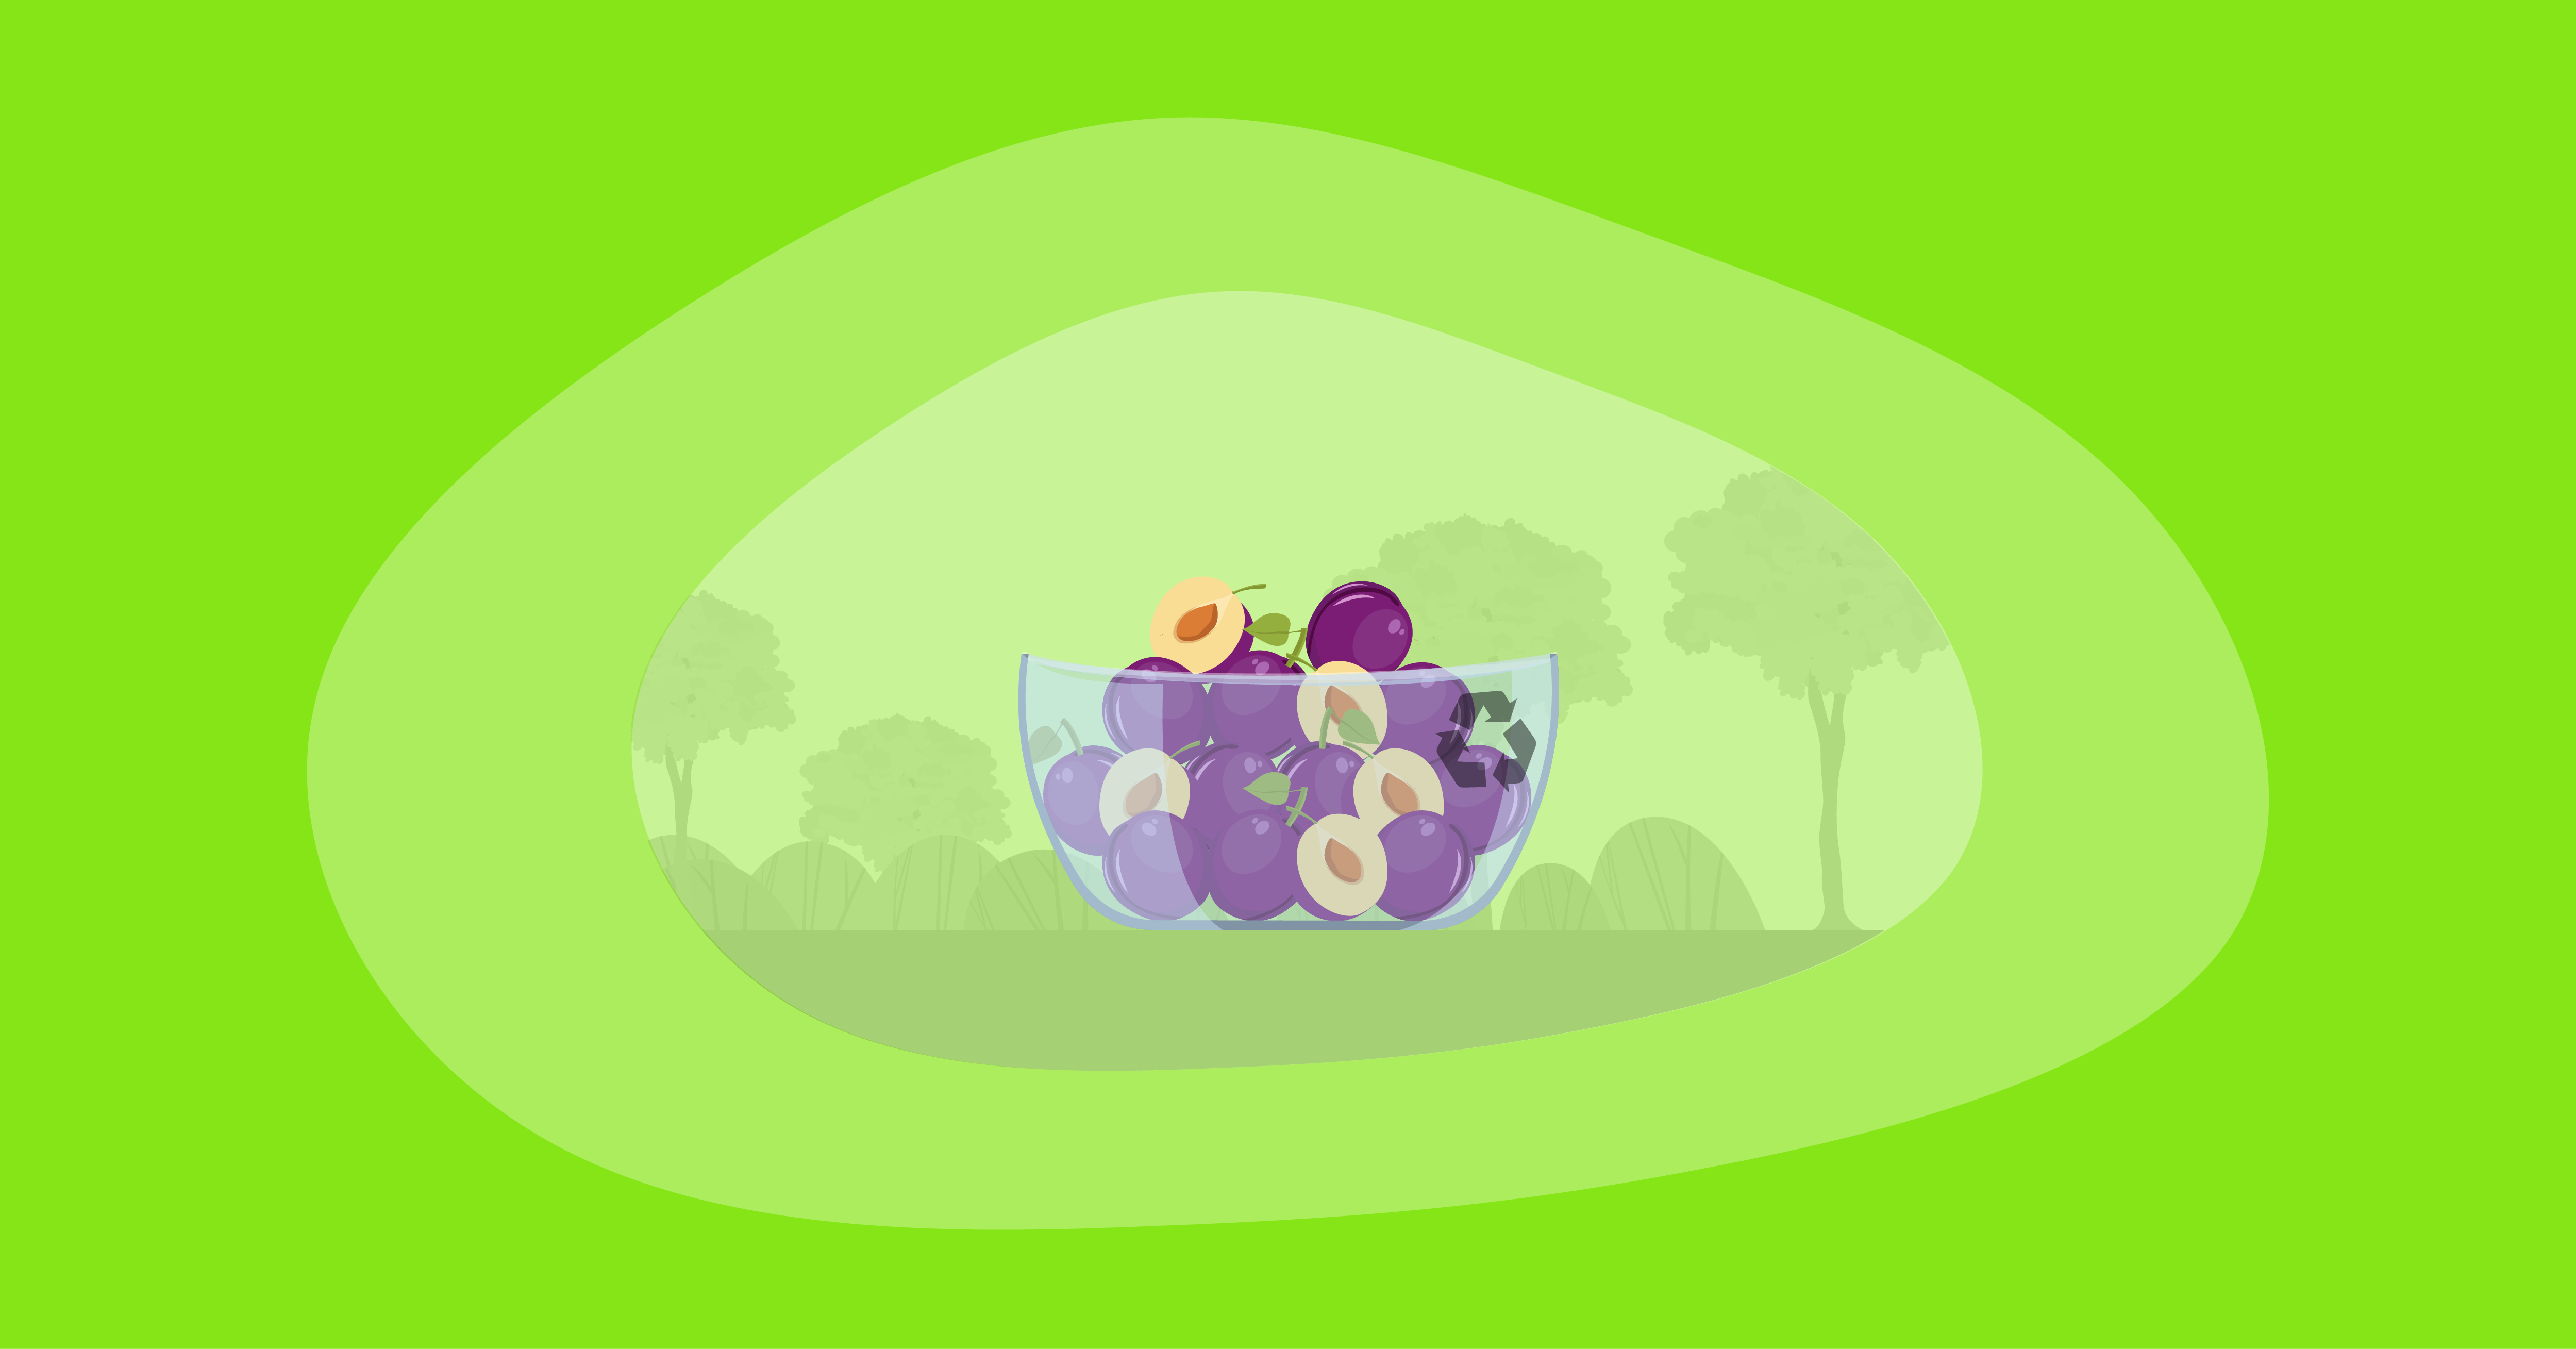 Illustration of plums inside a glass bowl